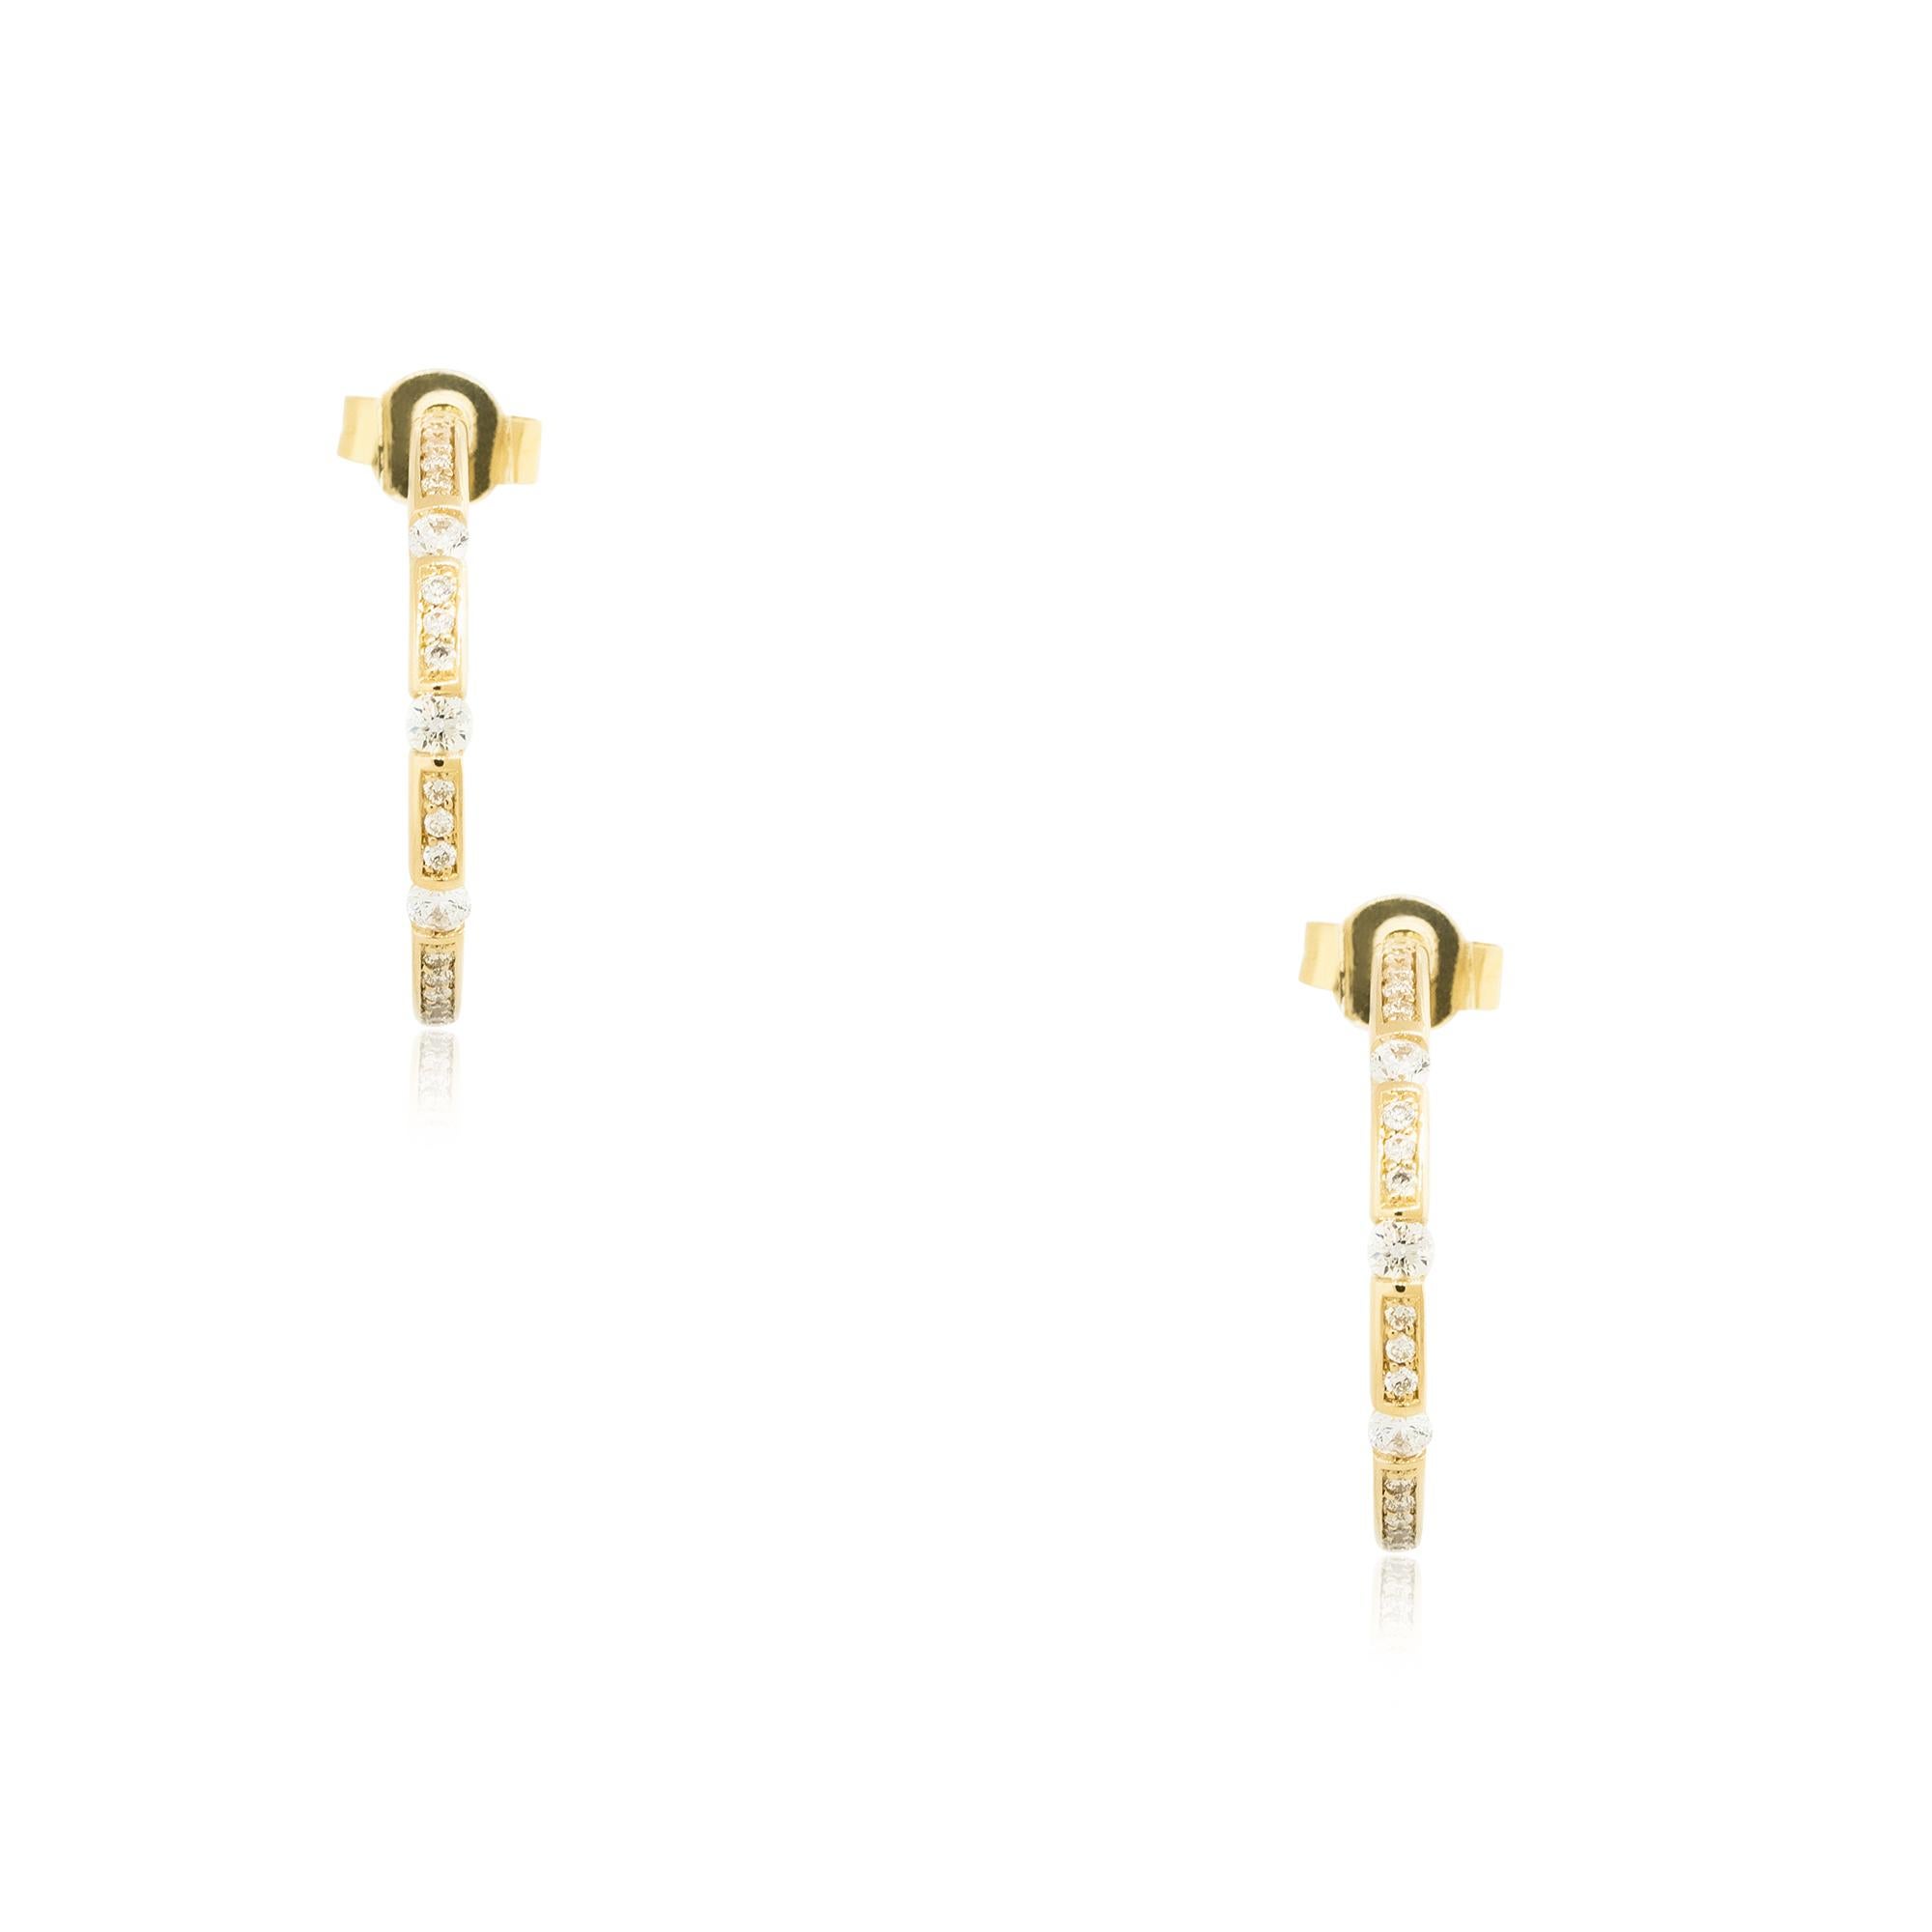 Material: 18k Yellow Gold
Diamond Details: Approx. 0.50ctw of round cut Diamonds. There are 3 larger Diamond stations and smaller Diamonds set throughout the stations. Diamonds are I/J in color and SI in clarity
Total Weight: 3.3dwt 
Earring Backs: